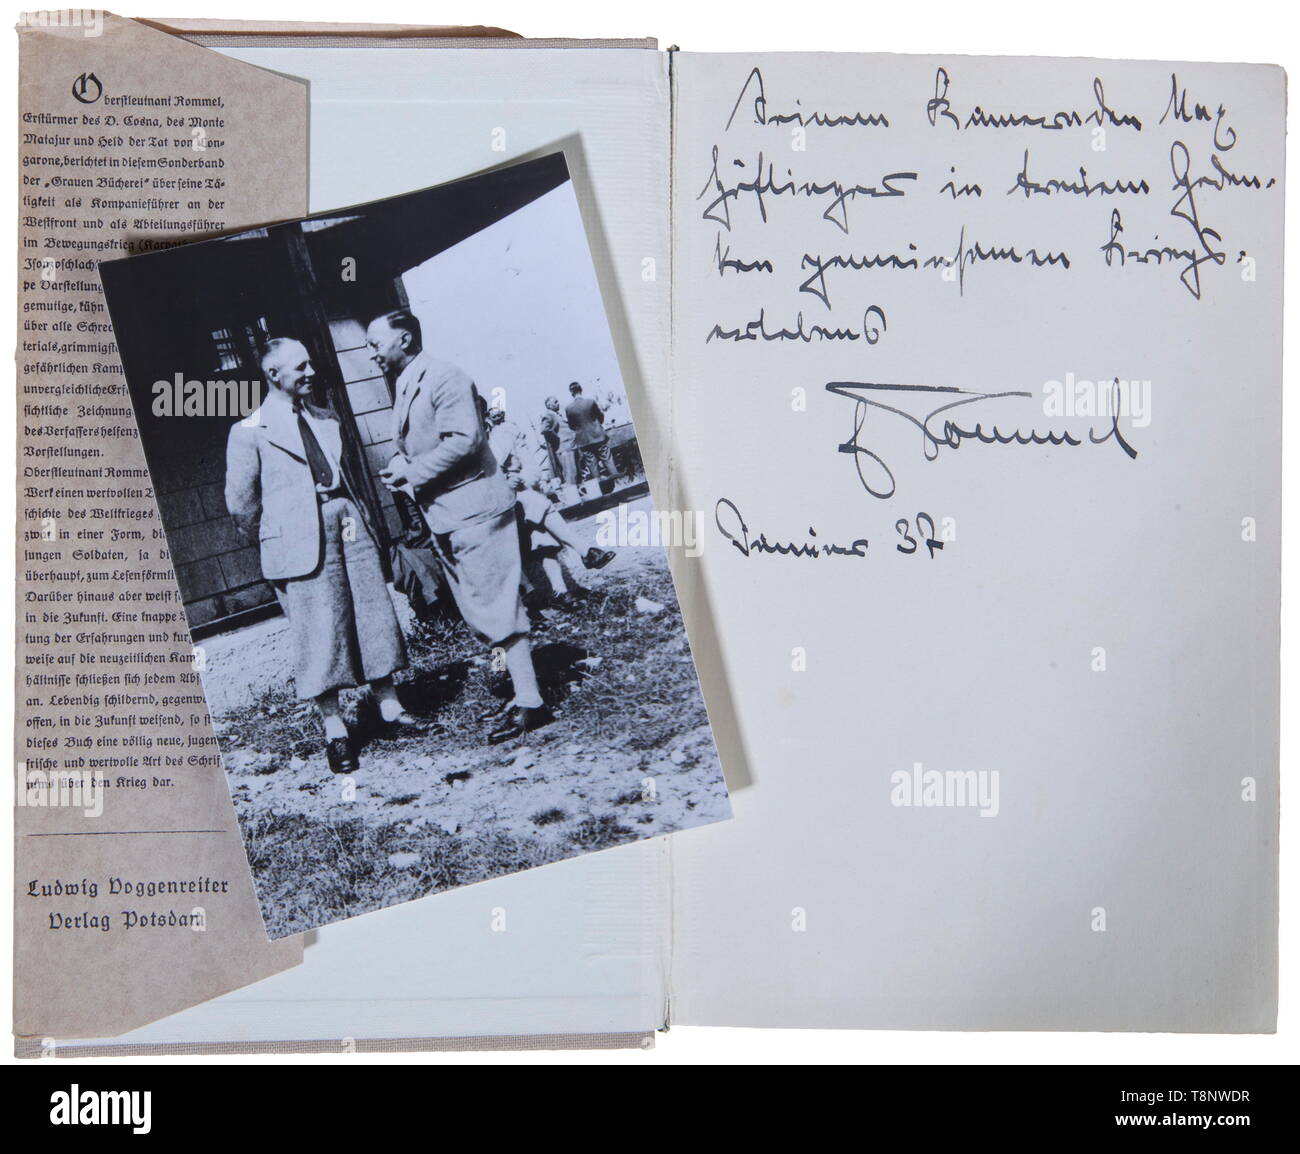 A dedicated copy of Rommel's 'Infanterie greift an' Written in 1937 by Oberstleutnant Erwin Rommel, 357 pages, war experiences and infantry tactics with some illustrations. Dedicated to his comrade Hoflinger, remembering the holiday in the mountains Dec. 1937, signed, with photo of Rommel and Hoflinger in civil dress in front of retreat. Dimensions 9 x 12,5 cm. Dust cover damaged. USA-lot, see page 5. historic, historical, 20th century, Additional-Rights-Clearance-Info-Not-Available Stock Photo